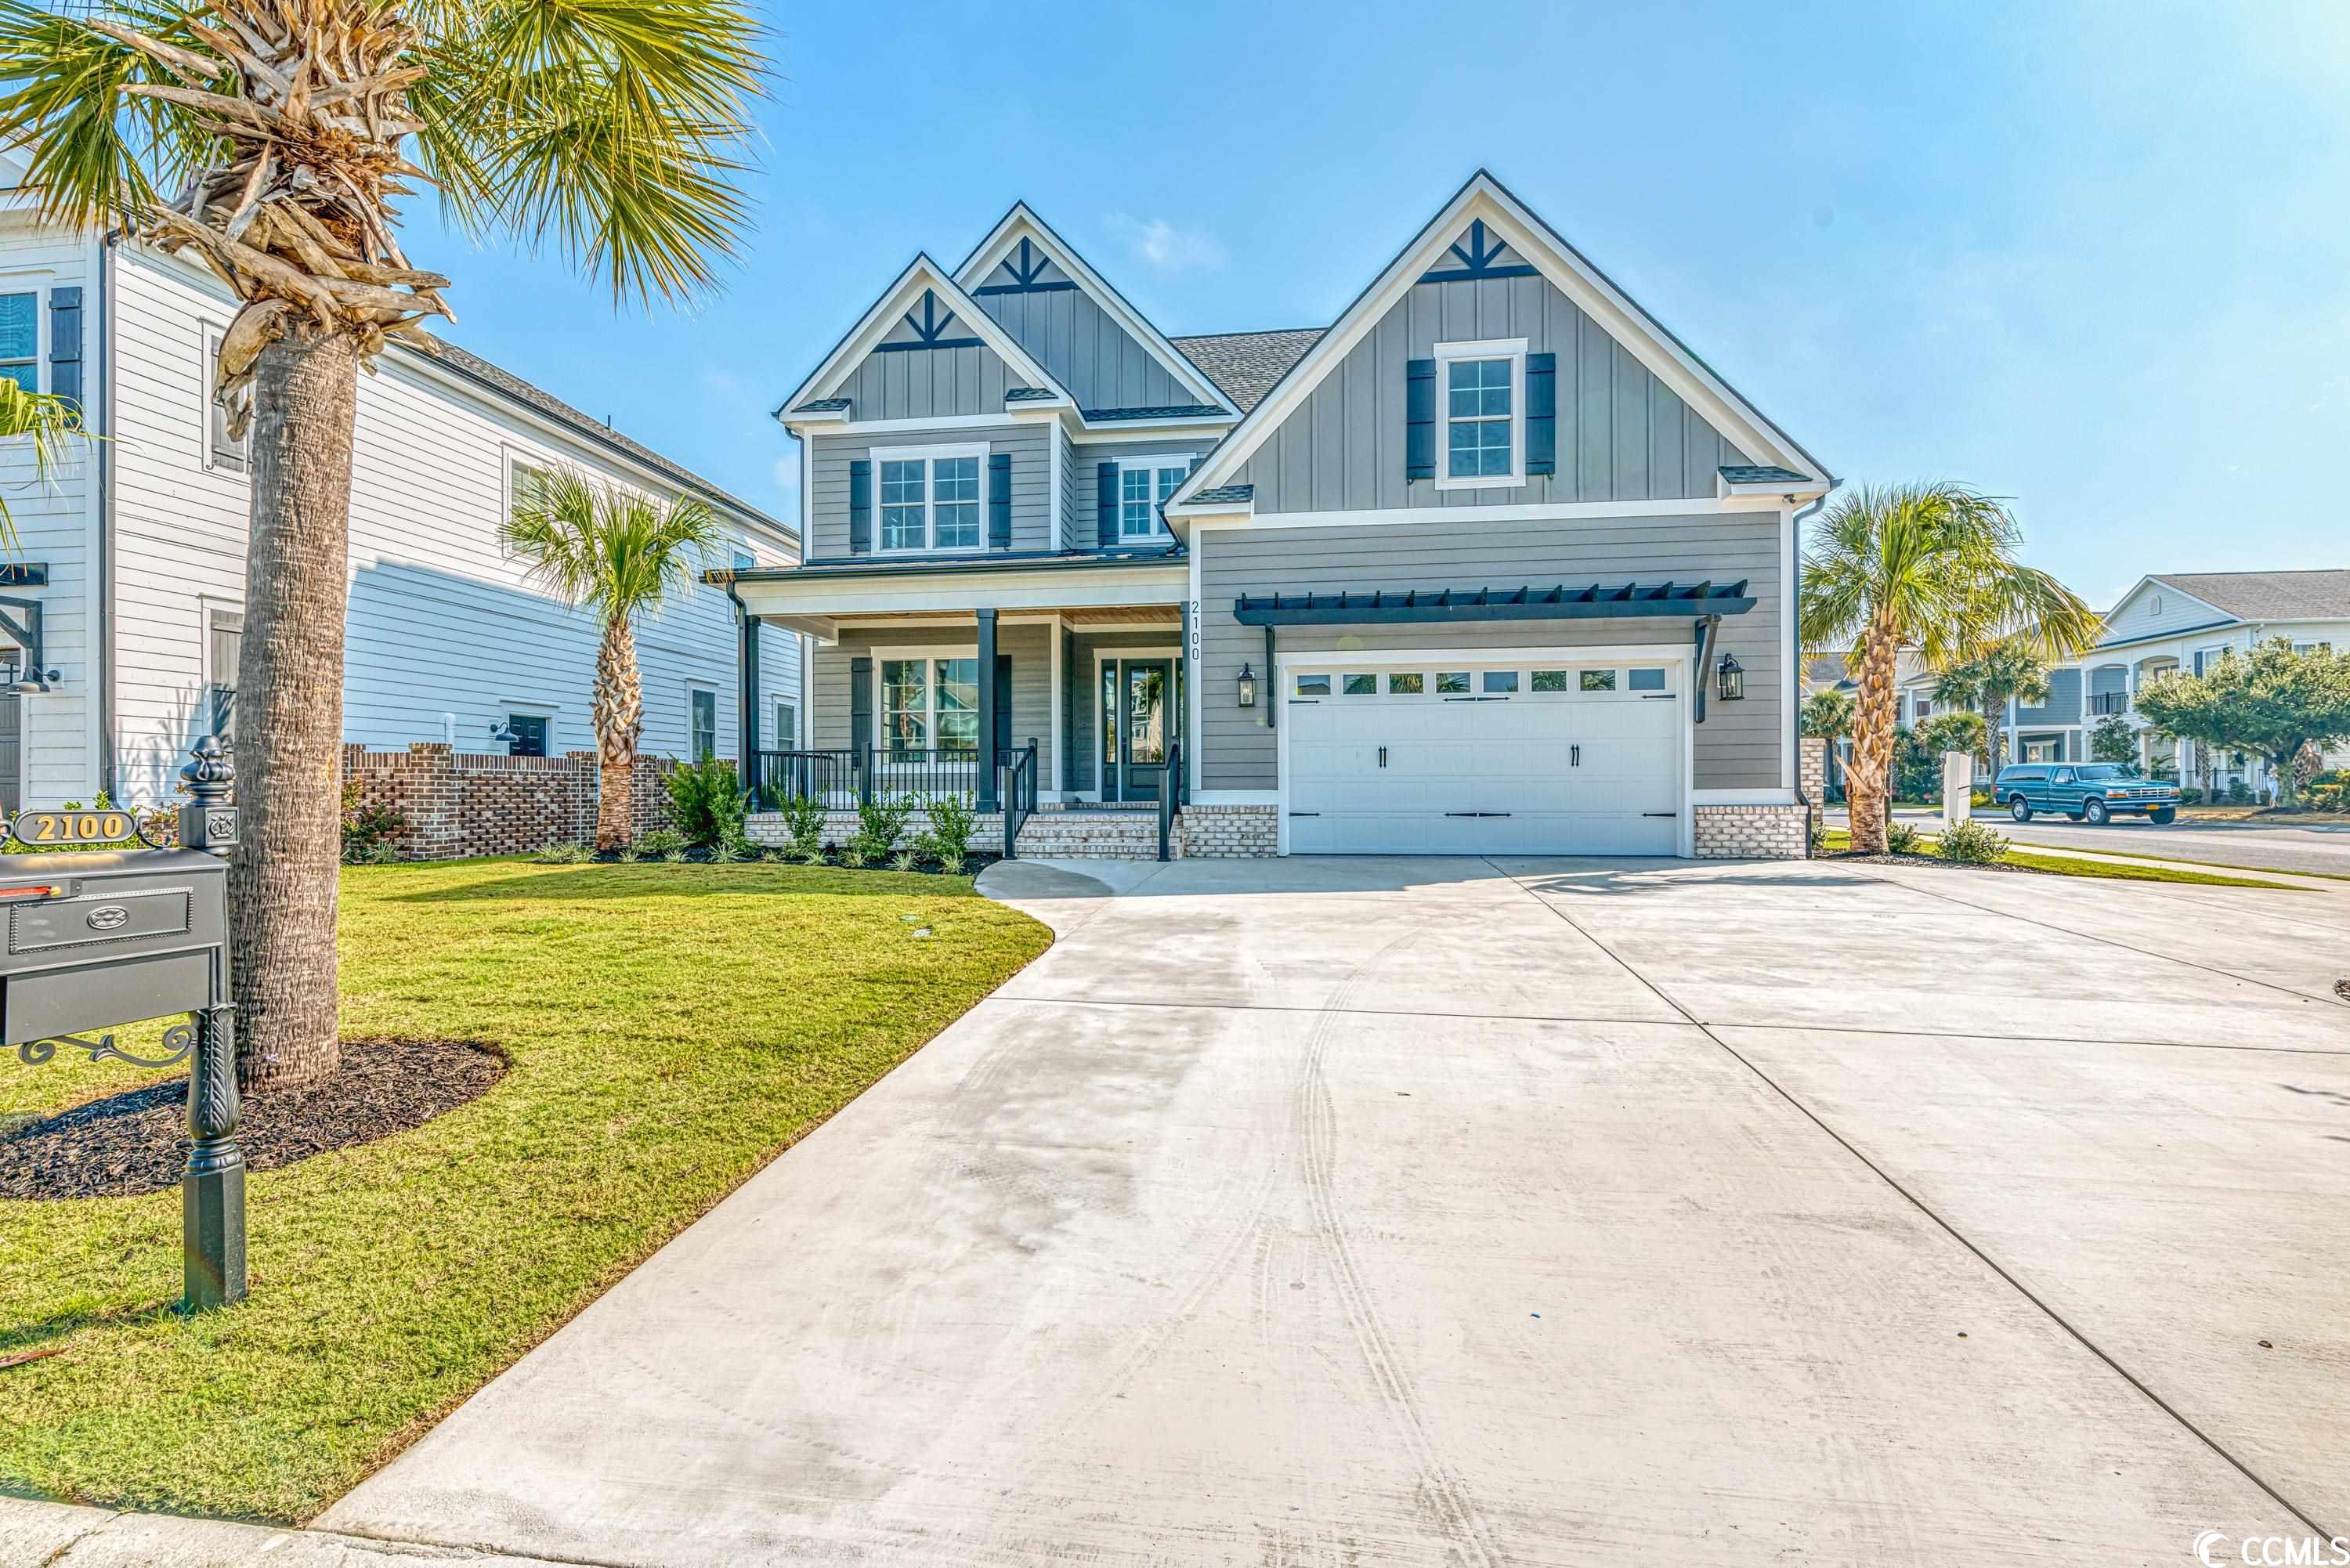 welcome to your dream coastal oasis at 2100 castille drive in the coveted waterway palms plantation community of myrtle beach, sc. this new construction 5-bedroom, 4-bathroom home sprawls over 3,817 heated square feet, and 4,777 total square feet, offering an extraordinary blend of space, luxury, and modern living.  step through the front door and marvel at the grandeur of the open floor plan. rich hardwood floors flow seamlessly throughout, and shiplap accent walls add a touch of coastal elegance. the gourmet kitchen, adorned with striking quartz countertops and a convenient walk-in pantry, overlooks the living and dining room – all designed with captivating lake views in mind. cozy up by the fireplace or unwind under the intricate beam ceilings, relishing the perfect blend of beauty and comfort.  the expansive master bedroom is a sanctuary situated on the main floor, offering resplendent views of the tranquil lake. a second bedroom downstairs serves as an adaptable space – it can make a perfect home office or guest room, depending on your needs. venture upstairs to discover three more generously-sized bedrooms and a flexible bonus room, ideal for a sixth bedroom, home gym, or media room.   step outside to the spacious screened porch, perfect for enjoying those warm, southern evenings. an outdoor summer kitchen and patio create an idyllic setting for hosting bbqs and parties, all enhanced by lush tropical landscaping and a picturesque lake view. the home sits on a sizeable corner lot and features a circular driveway, providing ample parking space along with a two-car garage.  waterway palms plantation is more than a neighborhood; it's a lifestyle. residents are spoilt with resort-like amenities, including a stunning clubhouse, a gym, and vibrant community events such as food trucks and outdoor movie nights. the community also boasts a sparkling swimming pool and lighted tennis courts, making relaxation and recreation a daily pleasure.  the home is nestled within an award-winning school district and conveniently located near a range of goods and services. the white sands of myrtle beach and the atlantic ocean are just a short six-mile drive away. additionally, a variety of entertainment venues and the international airport are within easy reach, ensuring convenience and connectivity.  don't miss out on the opportunity to experience the luxury coastal living you've always dreamed of at 2100 castille drive, myrtle beach, sc 29579. your vacation lifestyle starts here.